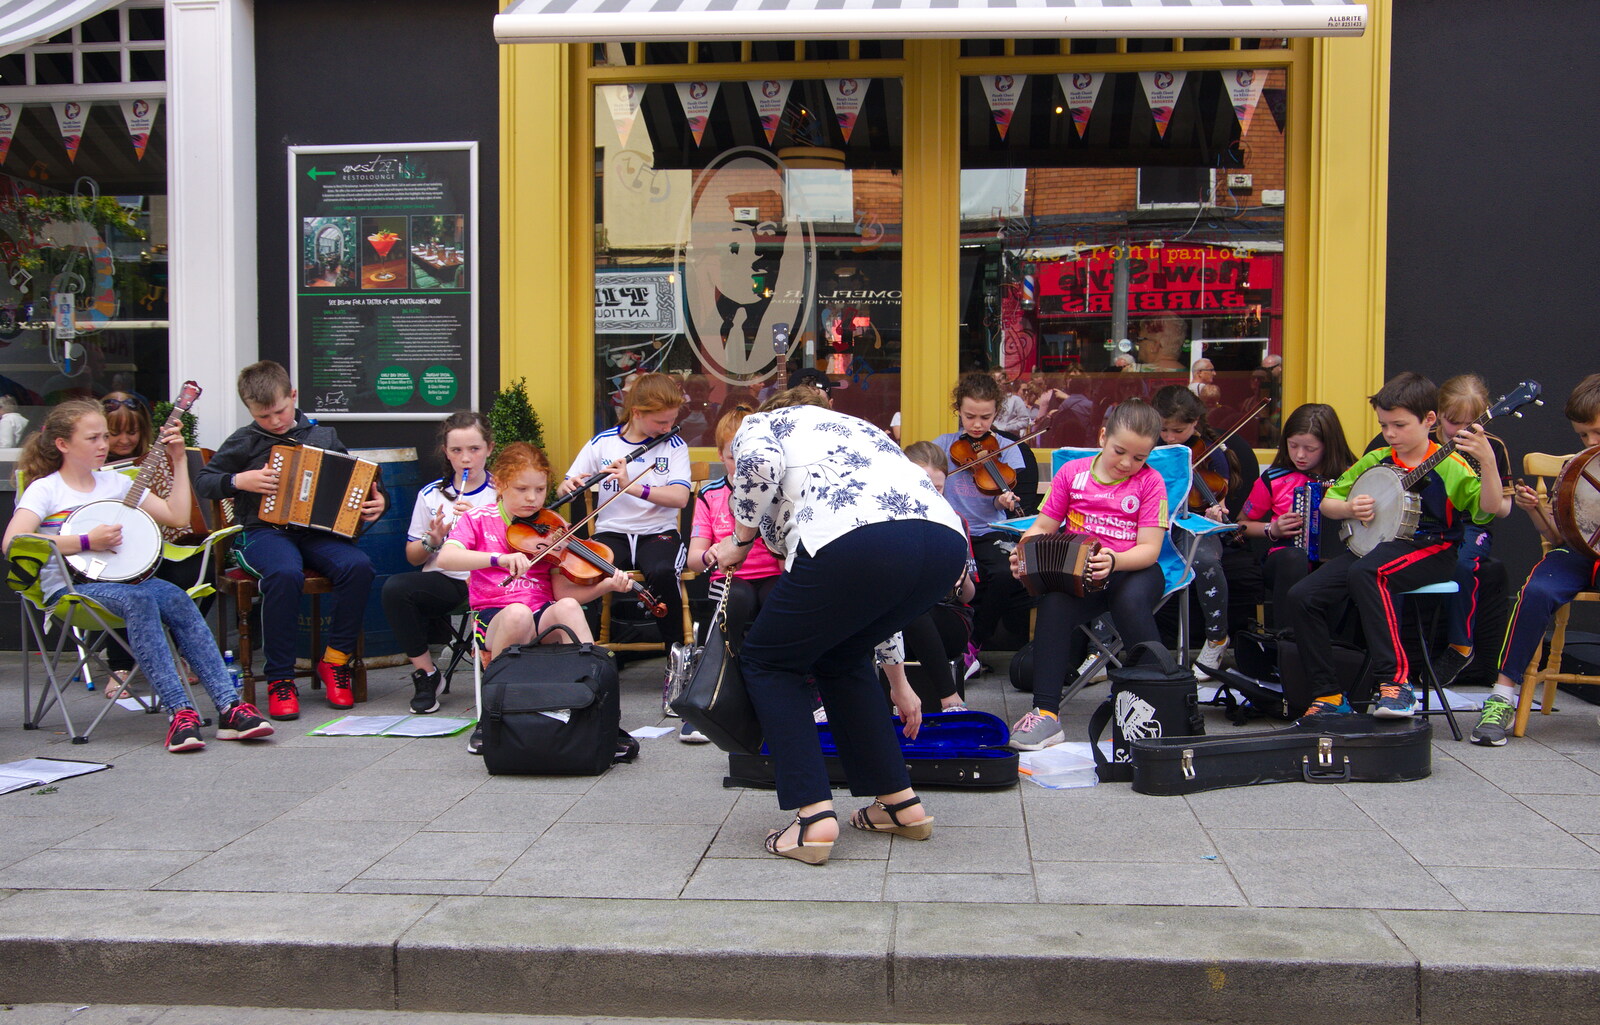 A large trad band is playing just up the street from The Fleadh Cheoil na hÉireann, Droichead Átha, Co. Louth, Ireland - 13th August 2019